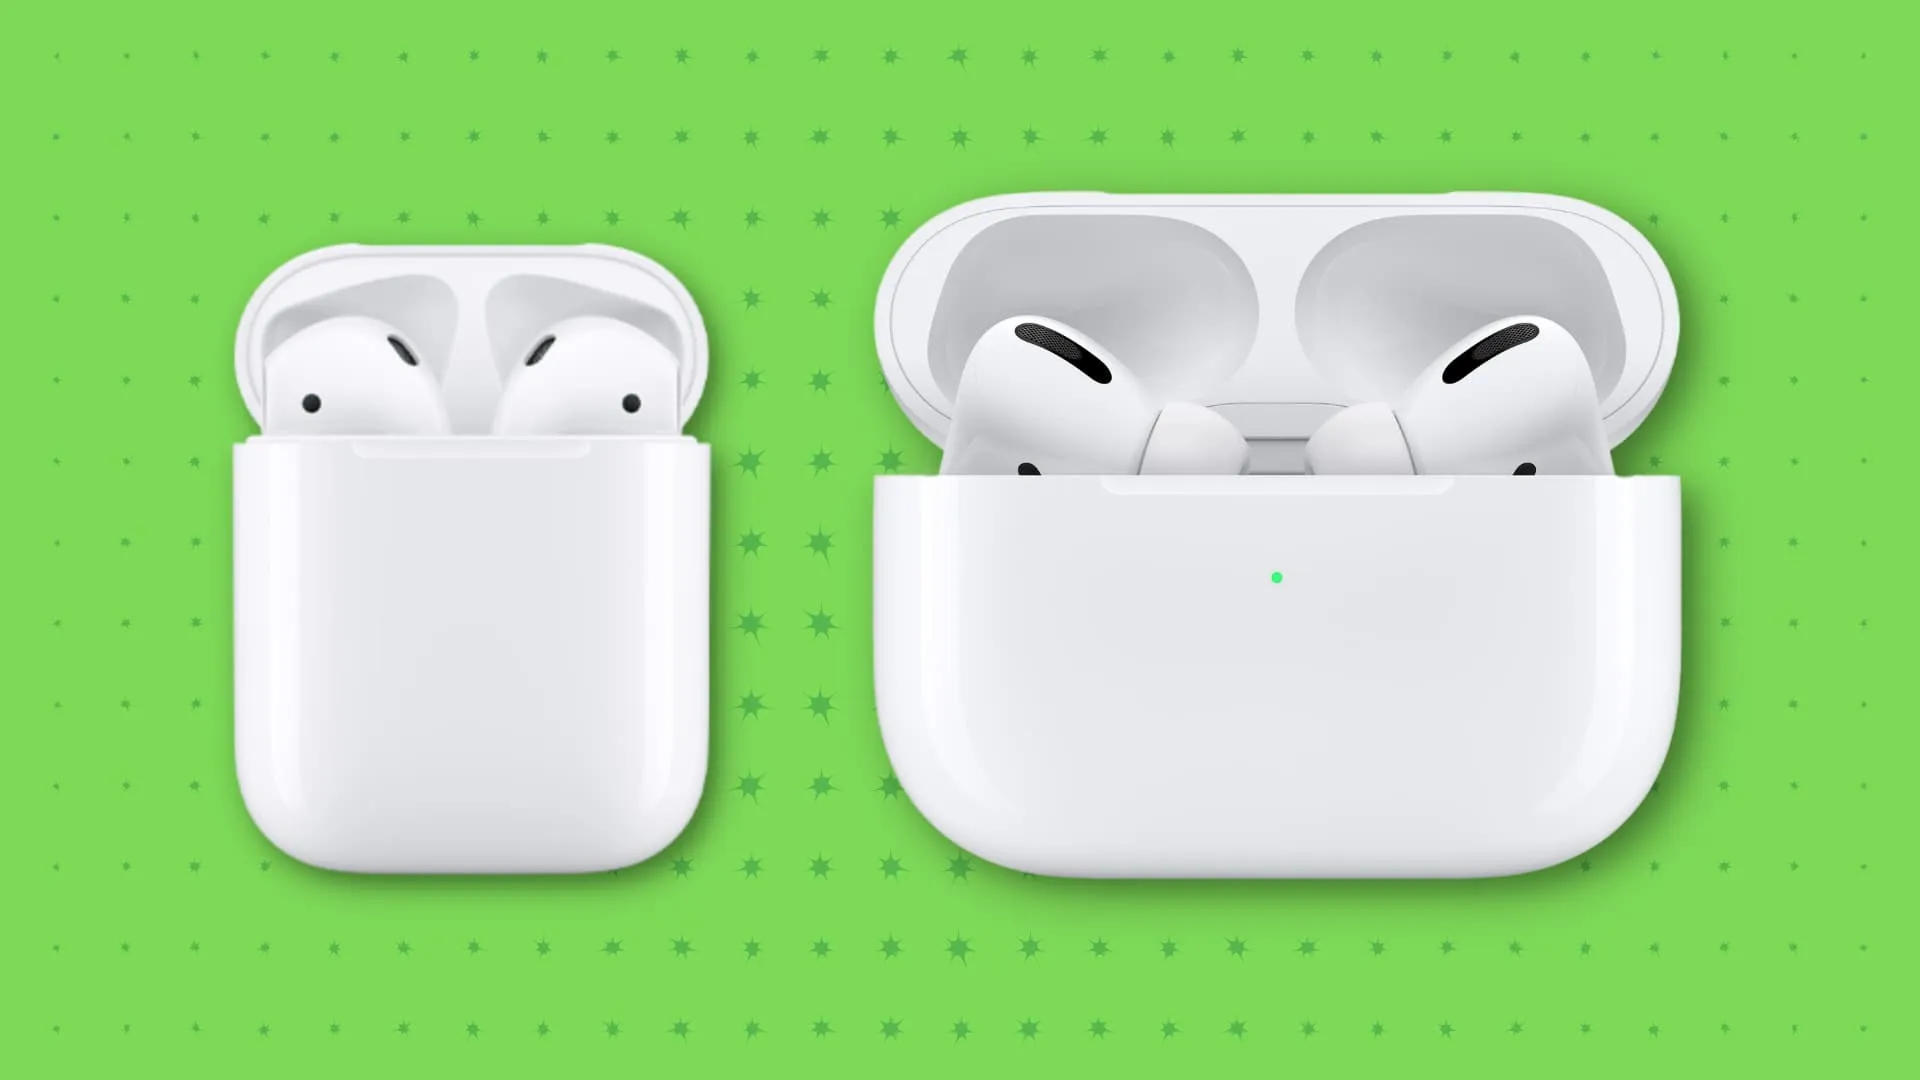 Clean AirPods and AirPods Pro